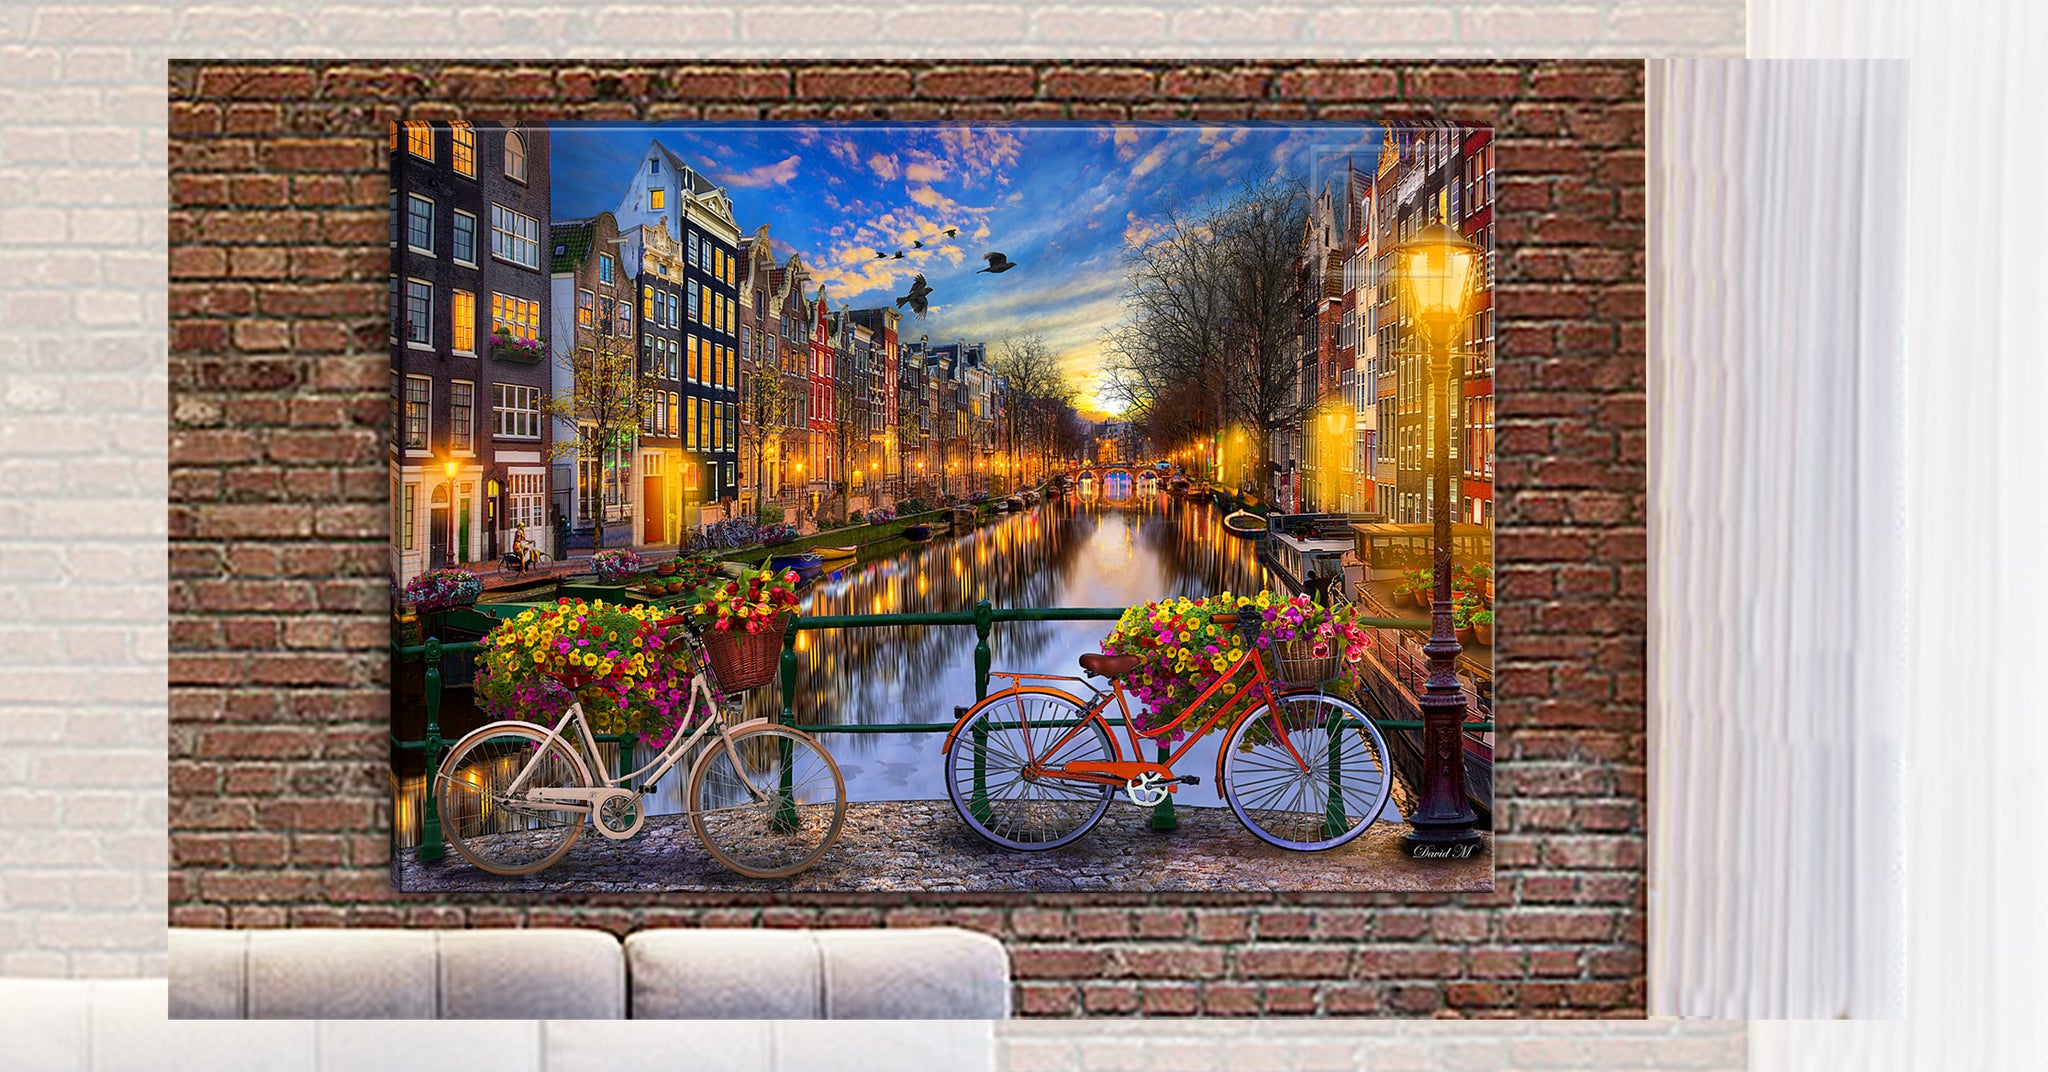 Amsterdam With Love   ______________________ Order Options Here